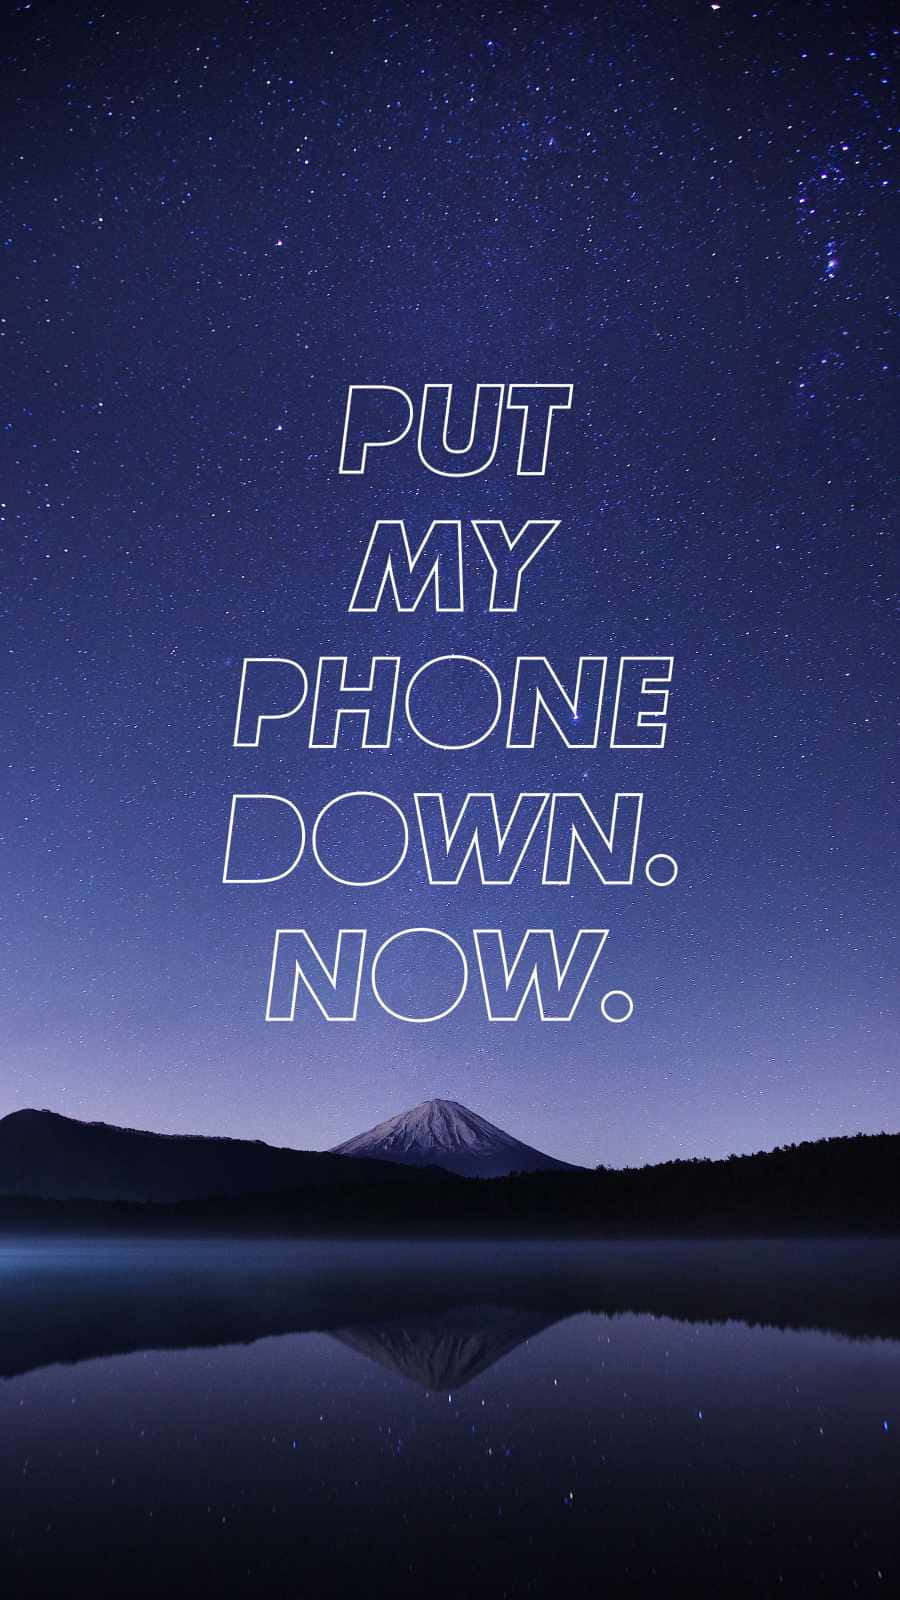 Download Put The Phone Down Wallpaper 